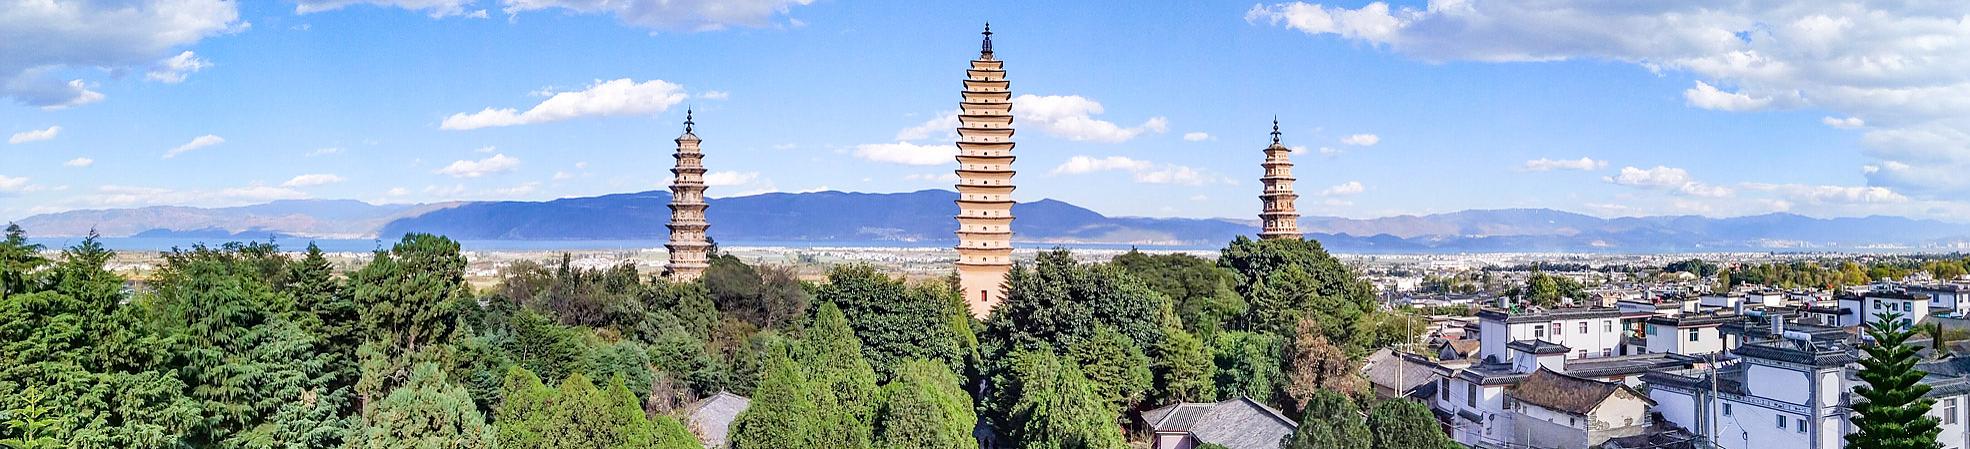 Dali Ancient City - Beautiful Example of Chinese Ancient city